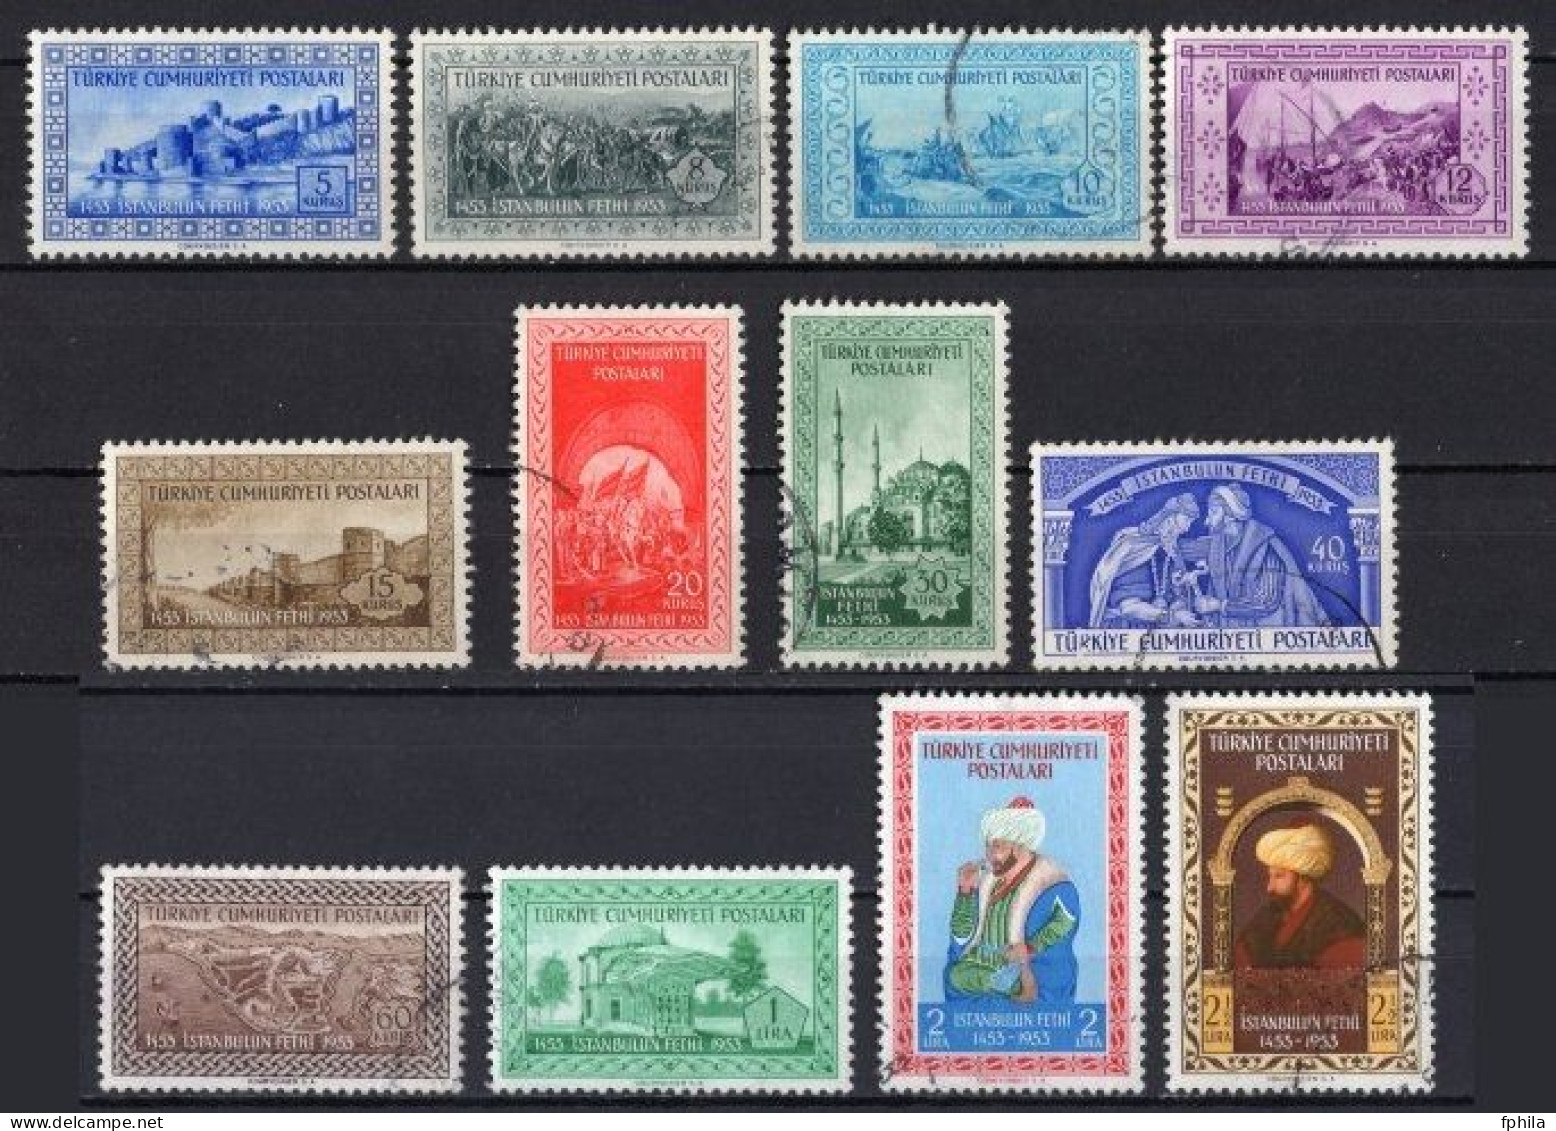 1953 TURKEY COMMEMORATIVE STAMPS FOR THE 500TH ANNIVERSARY OF THE CONQUEST OF CONSTANTINOPLE USED - Used Stamps